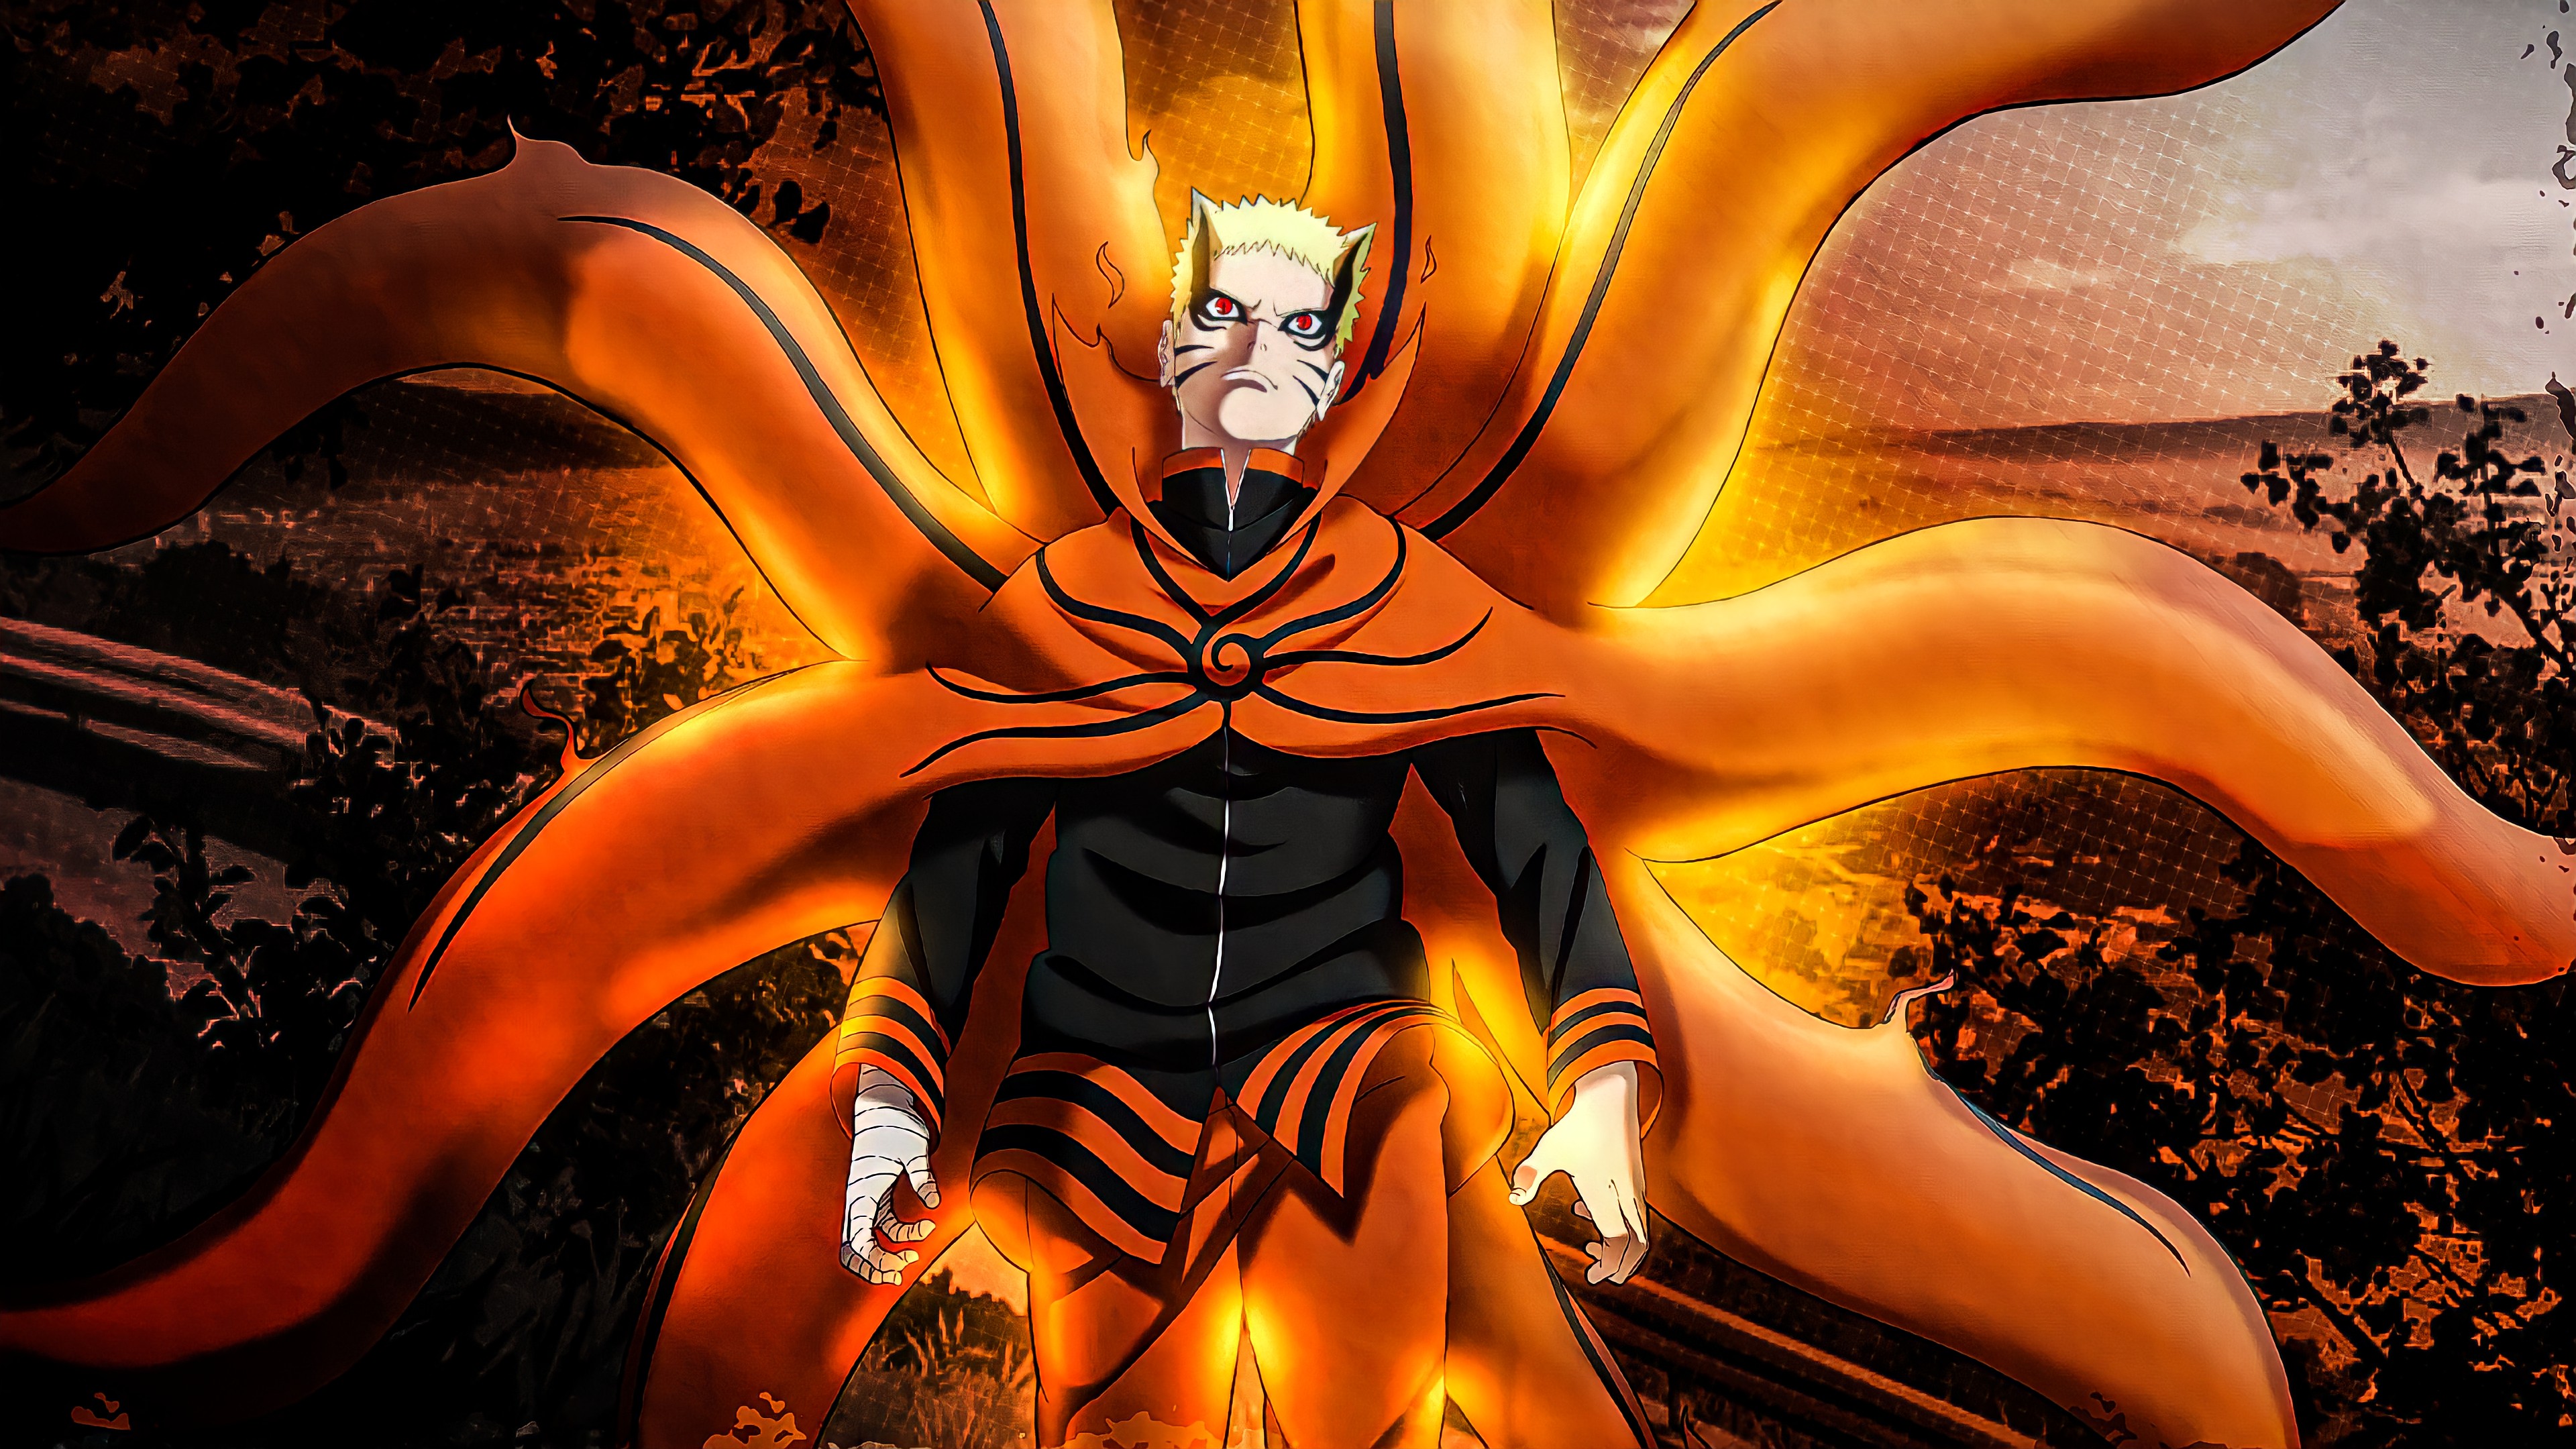 Free download Naruto 4k Ultra HD Wallpaper Background Image 3840x2160 [3840x2160] for your Desktop, Mobile & Tablet. Explore Baryon Naruto Wallpaper. Naruto Background, Uzumaki Naruto Wallpaper, Naruto Hinata Wallpaper